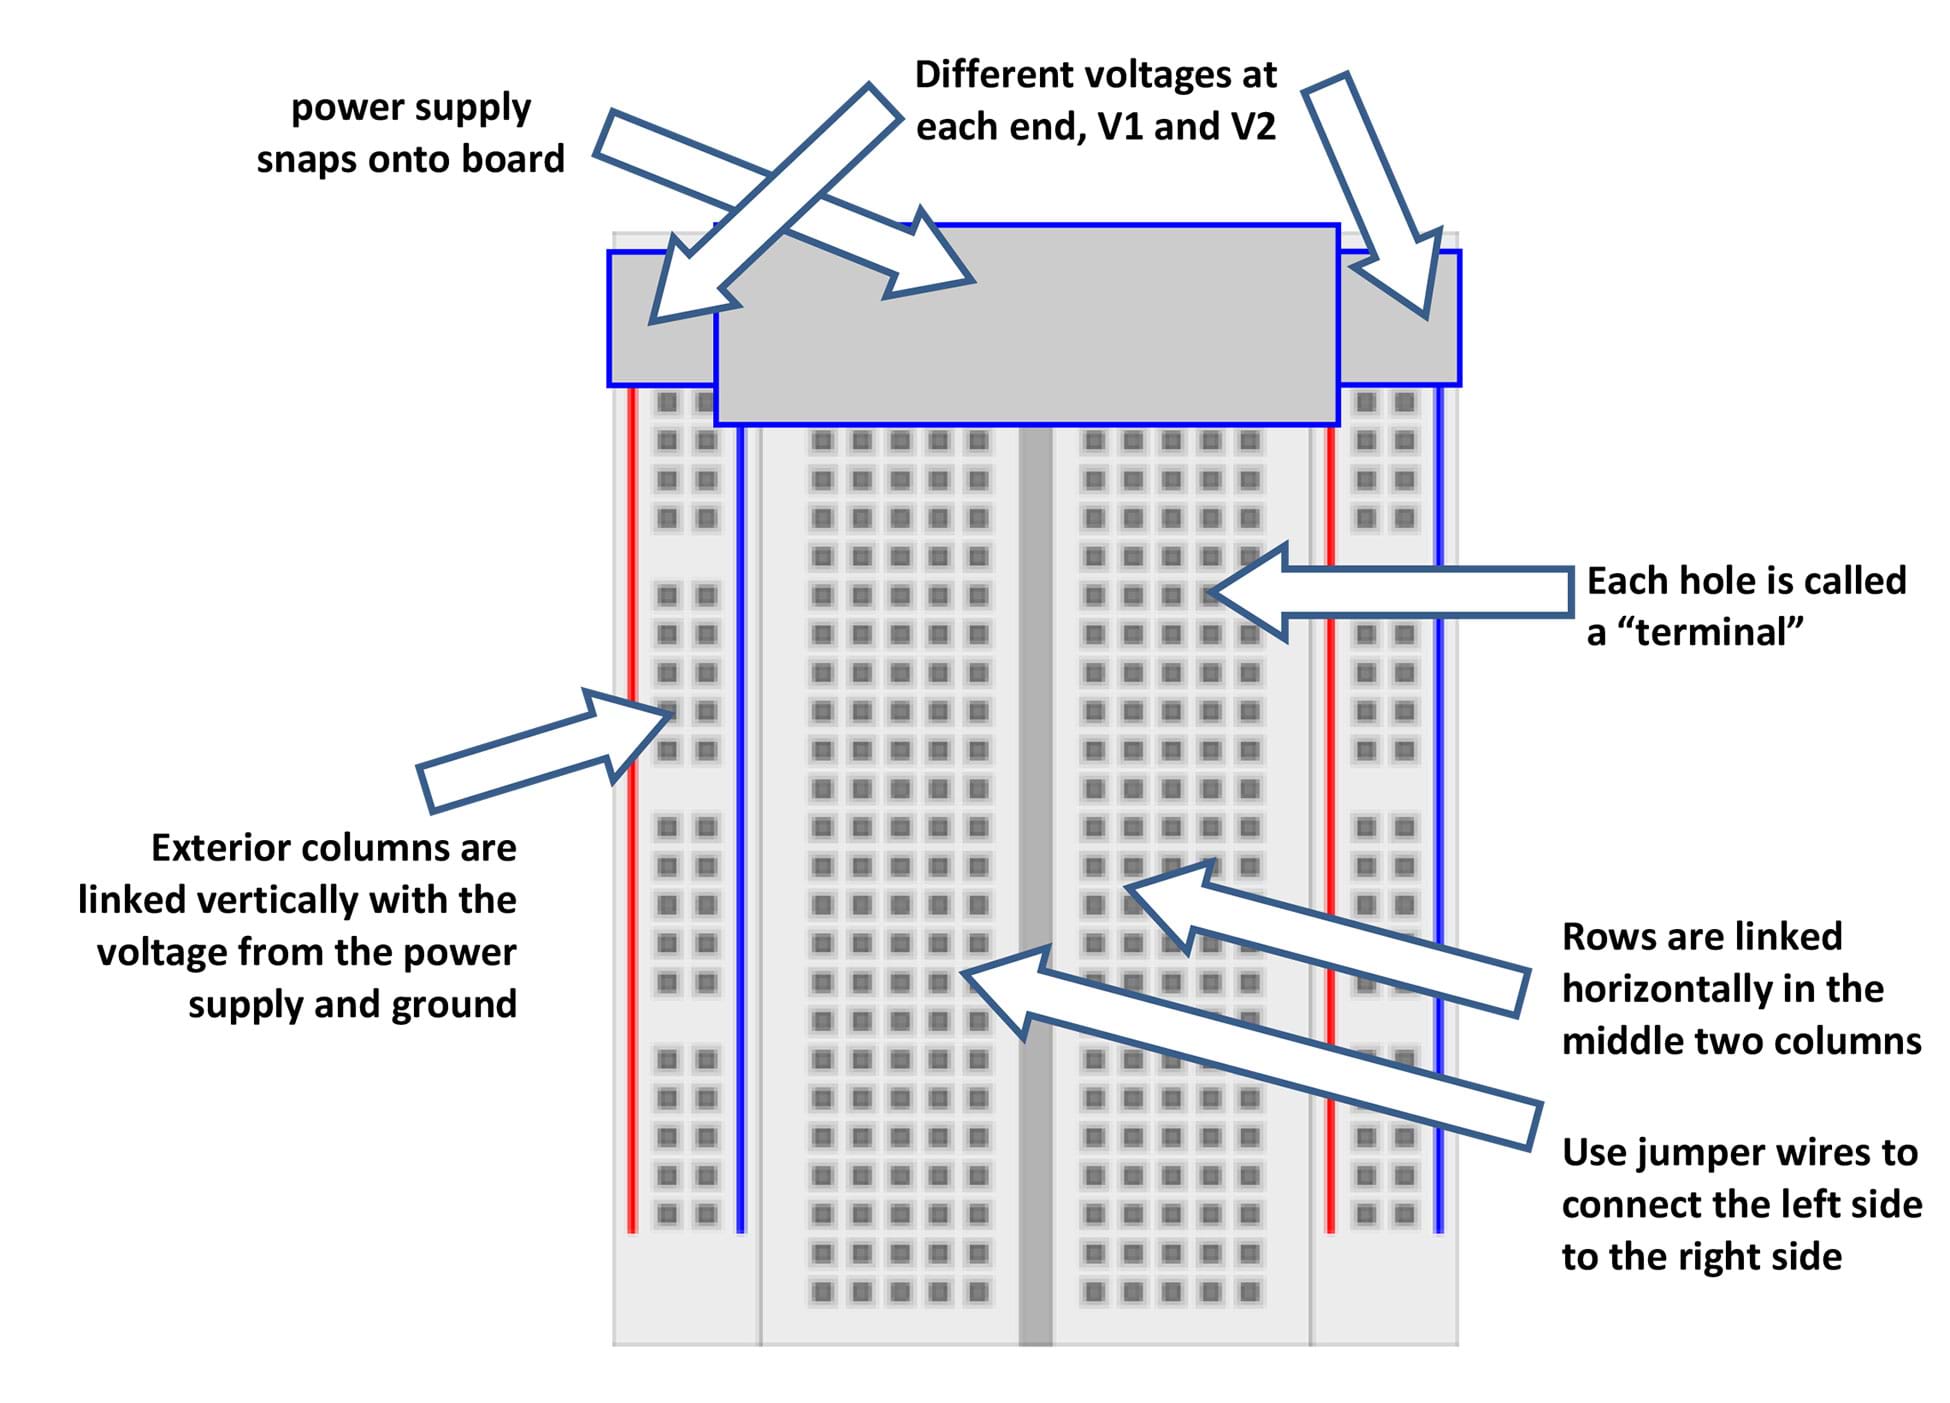 A breadboard diagram with arrows and labels: K2 power supply snaps onto the top of the breadboard; each hole is called a terminal; different voltages at each end, V1 and V2 (as in Figure 1); exterior columns are linked vertically with the voltage from the power supply and ground; rows are linked horizontally in the middle two columns—use jumper wires to connect the left side to the right side.